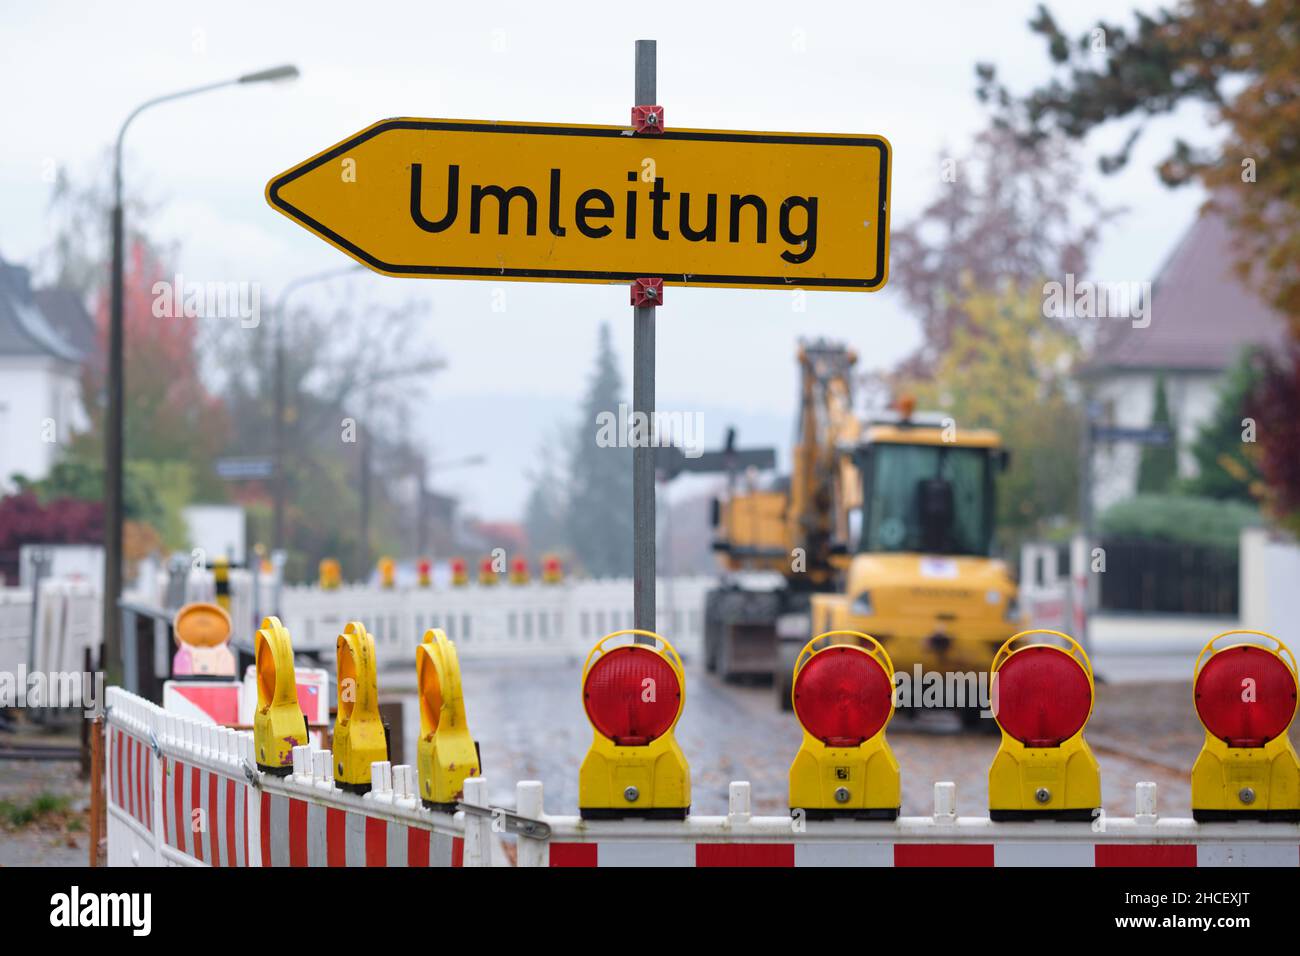 Nuremberg, Germany - November 01, 2021: A Umleitung ( detour ) traffic sign at a closed road due to a  construction site with construction vehicles Stock Photo